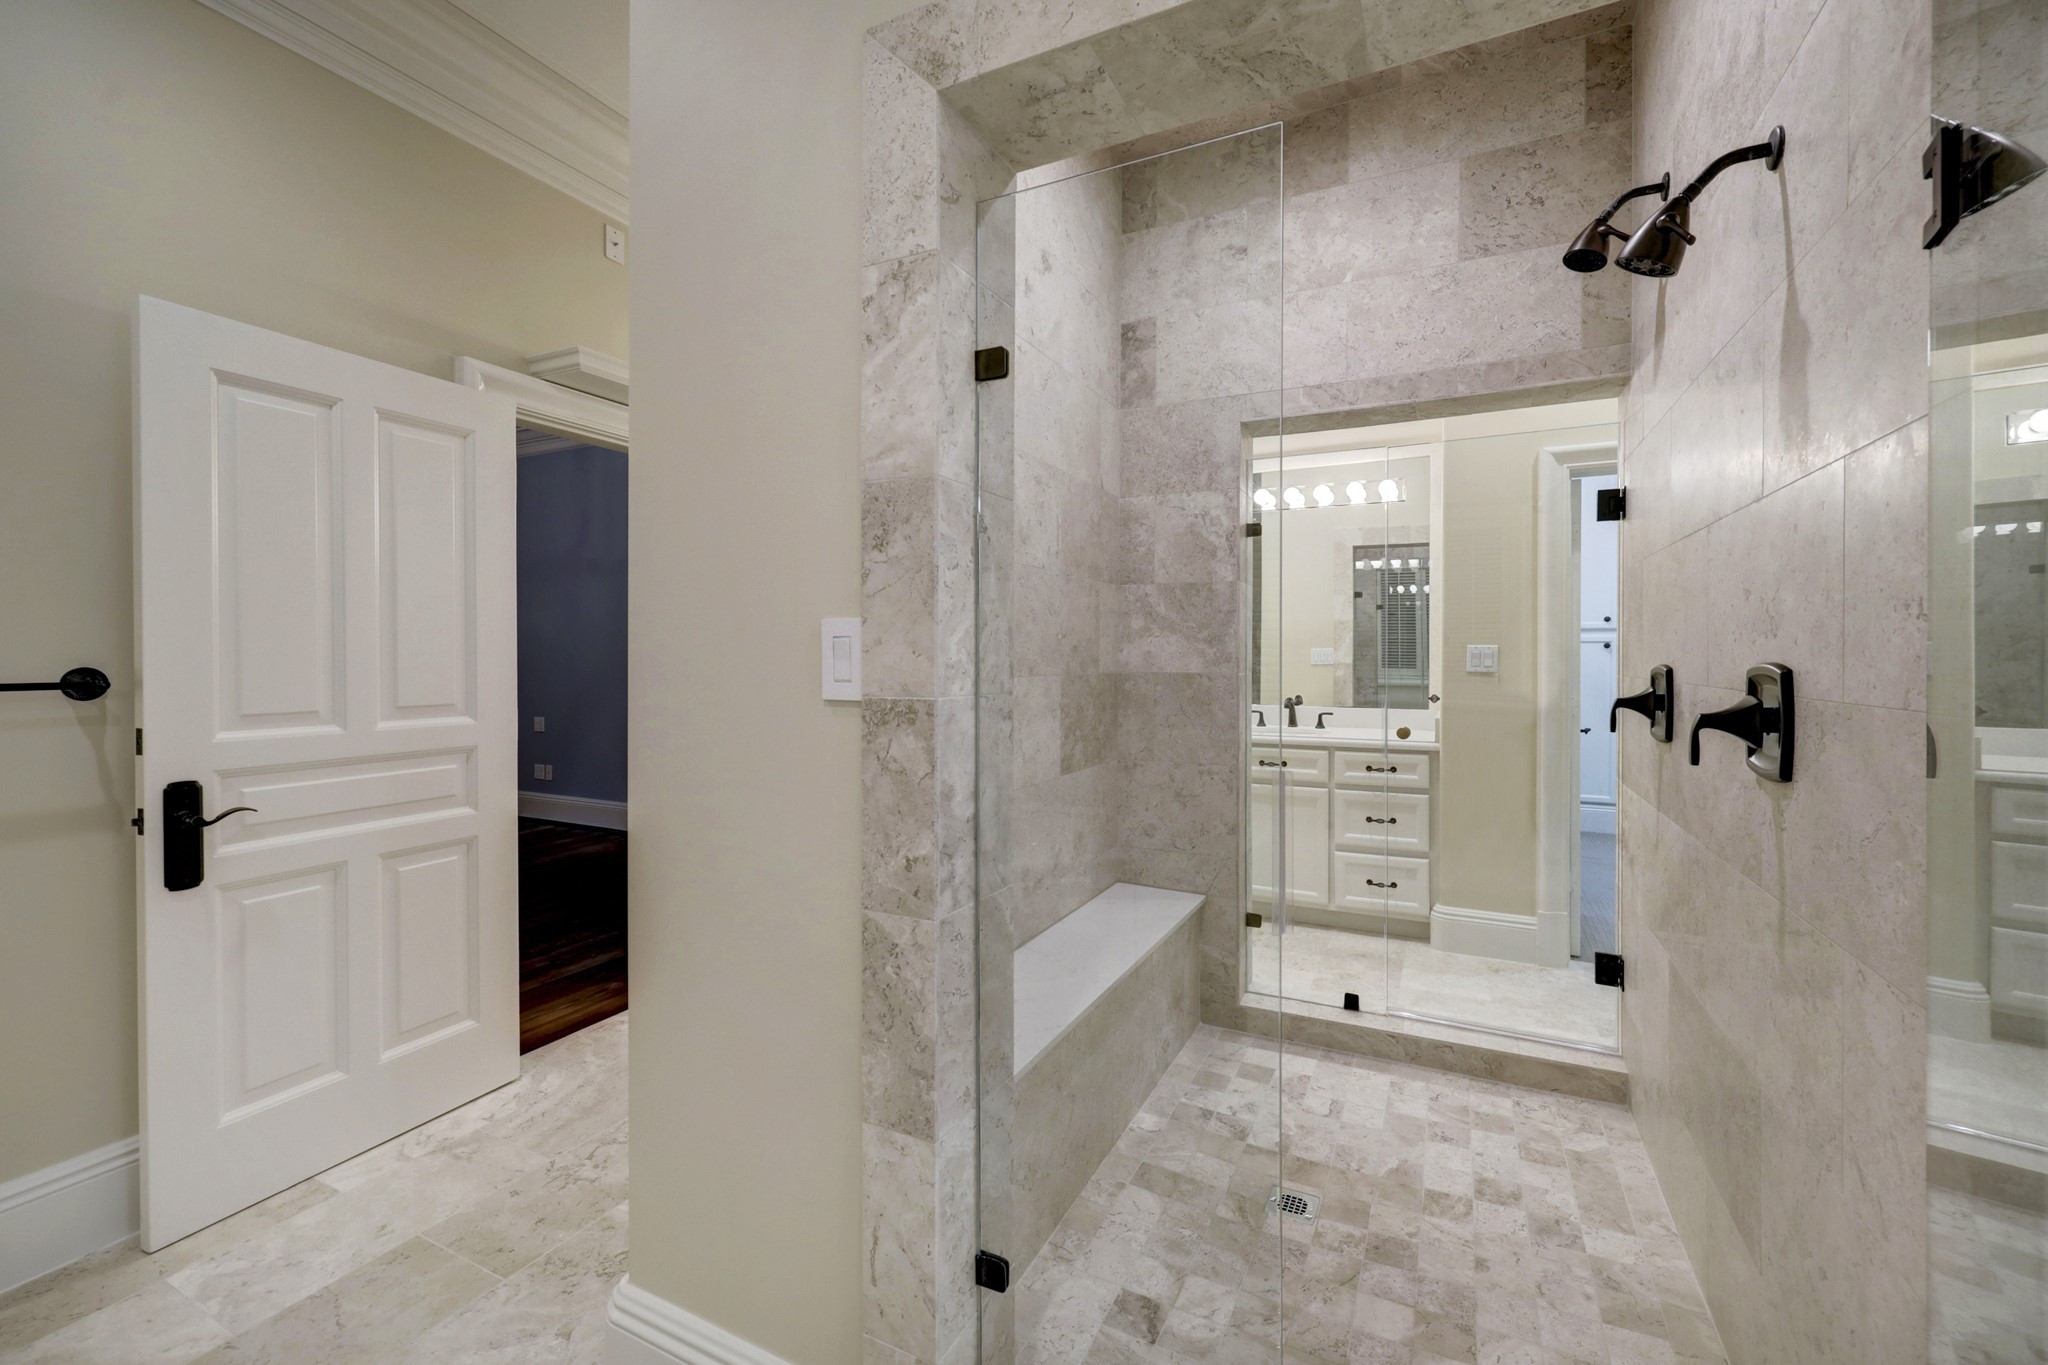 The shower has entrances from each of the full baths.  Two vanities, two private water closets, two large walk in closets, one shower with dual entries, one tub and one home office to complete the space.  Exceptional in every way!